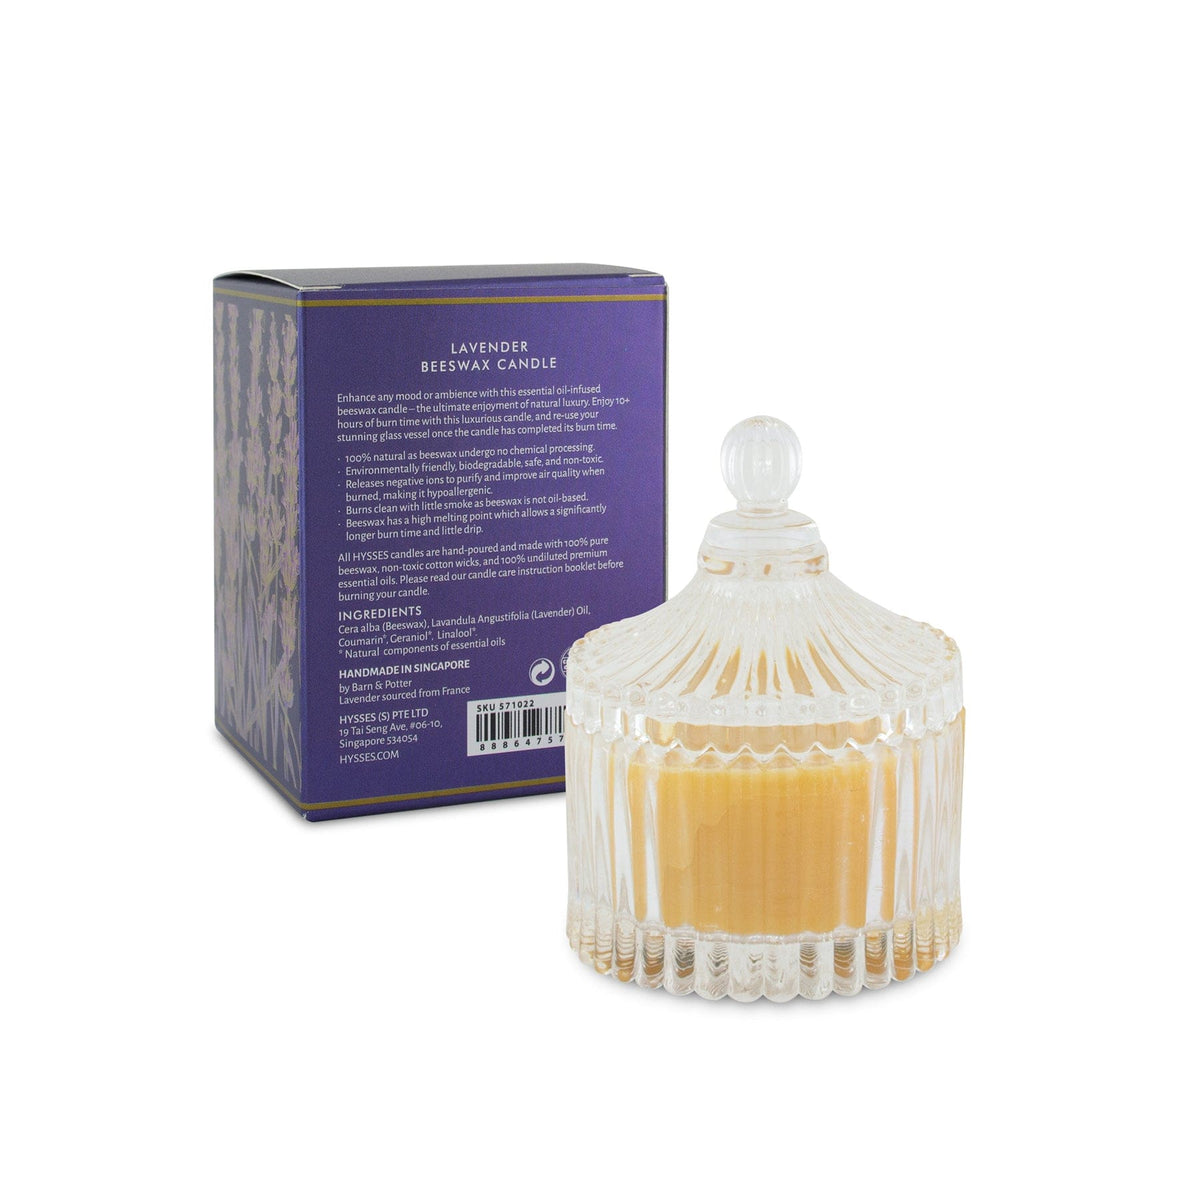 Hysses Home Scents Beeswax Candle Lavender